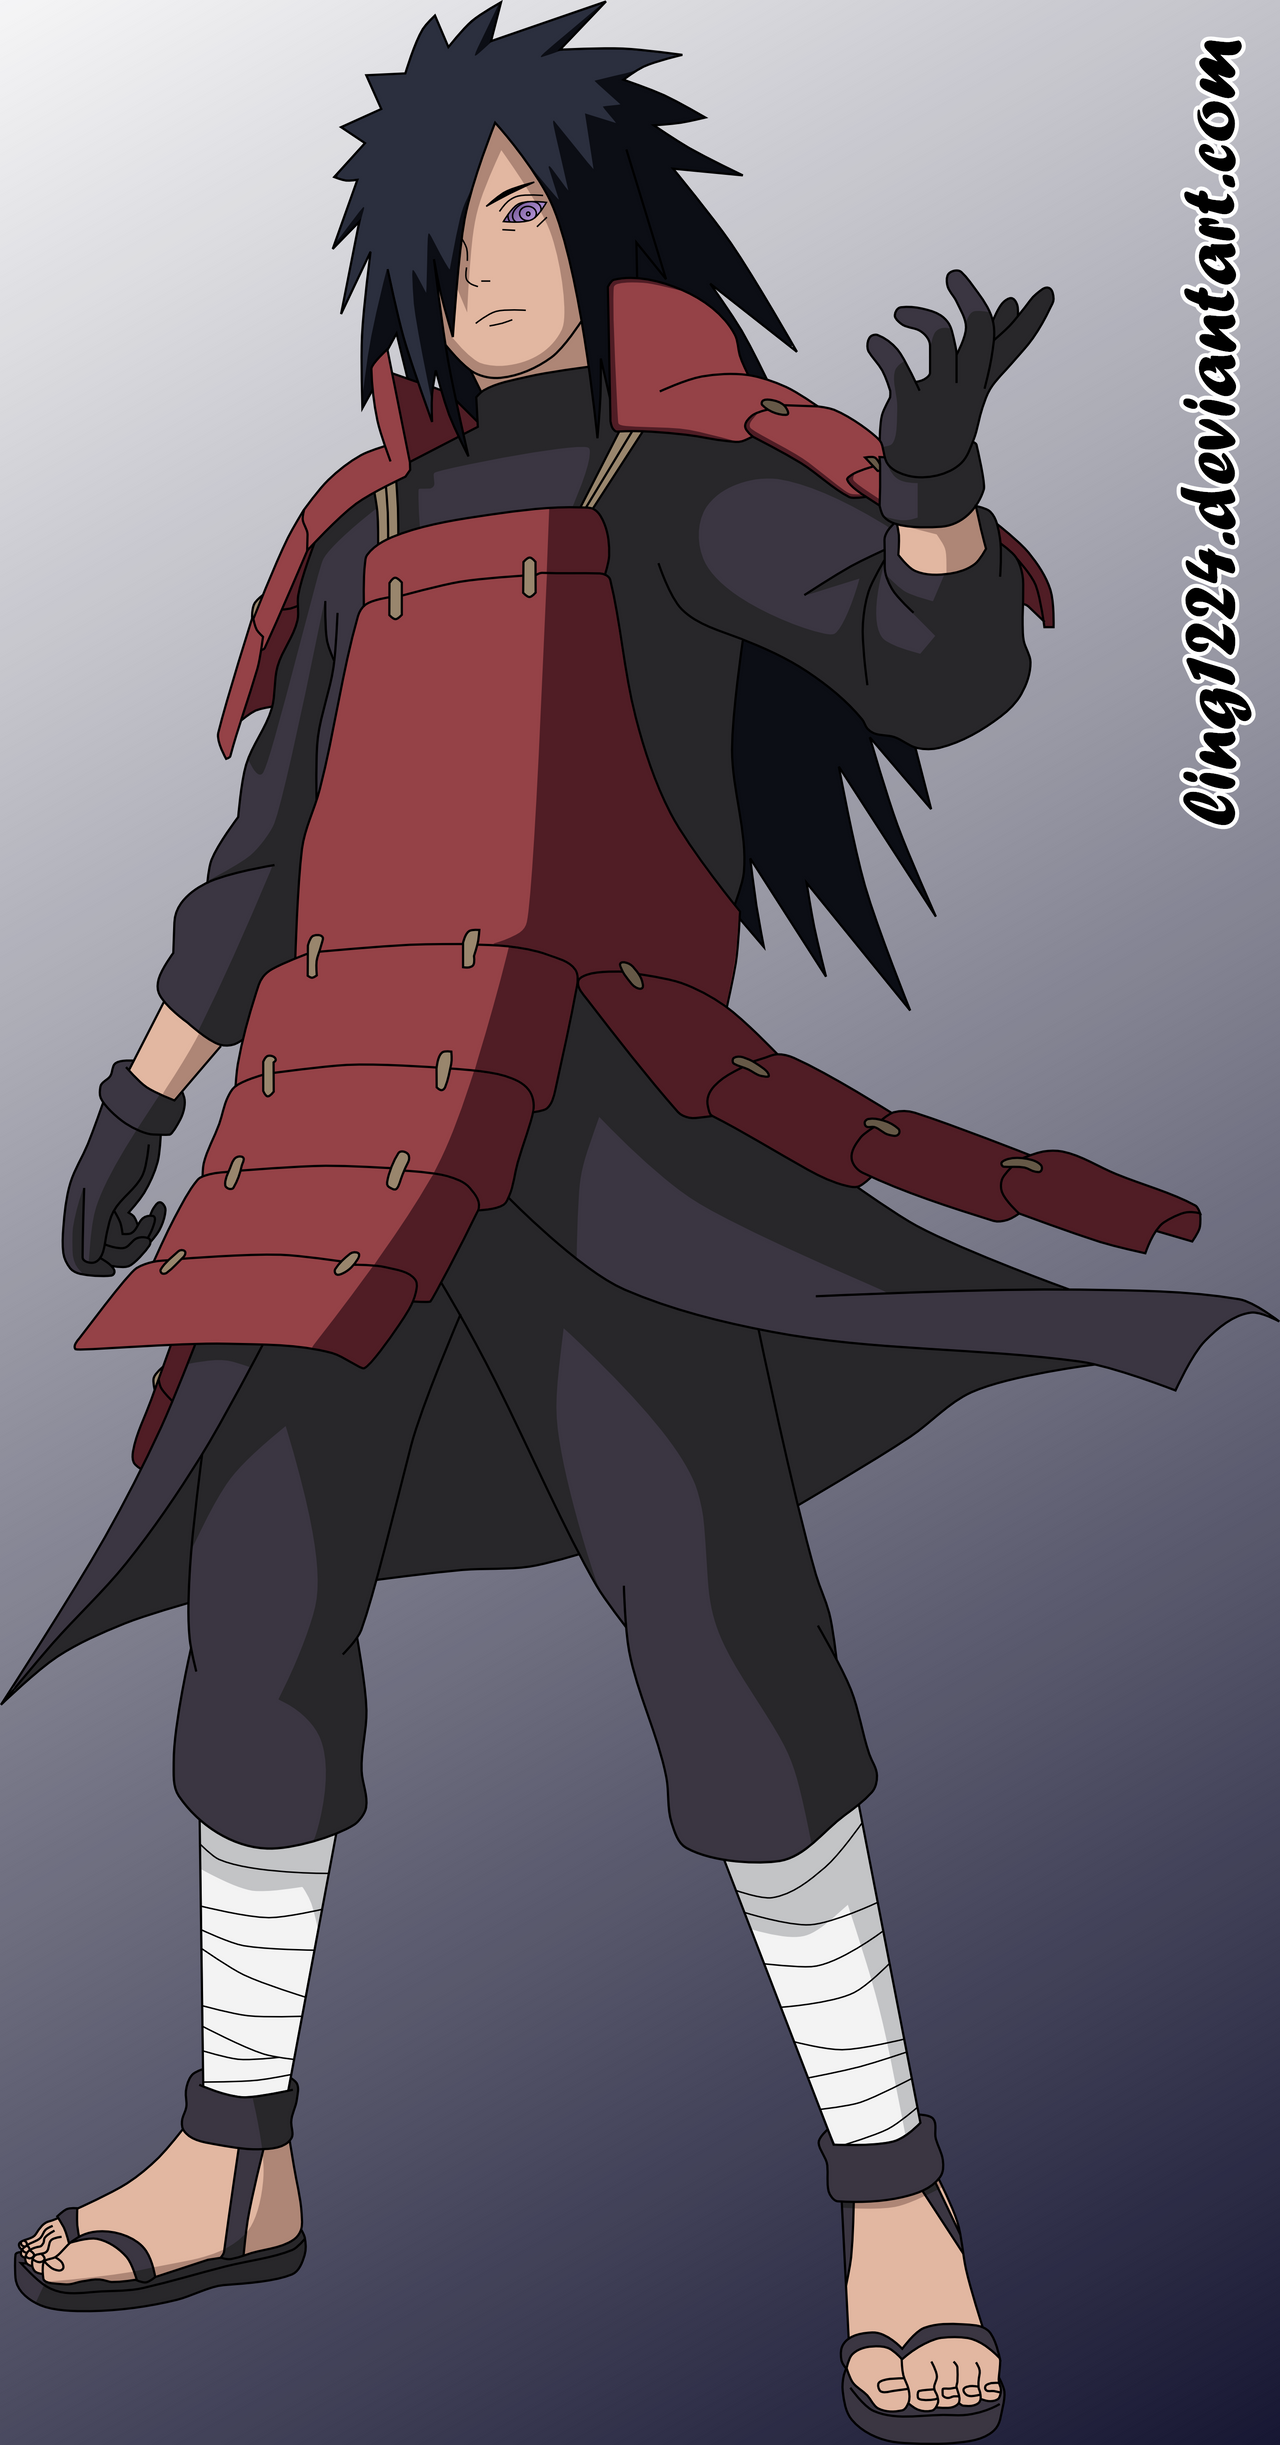 Madara Full View by ling1224 on DeviantArt